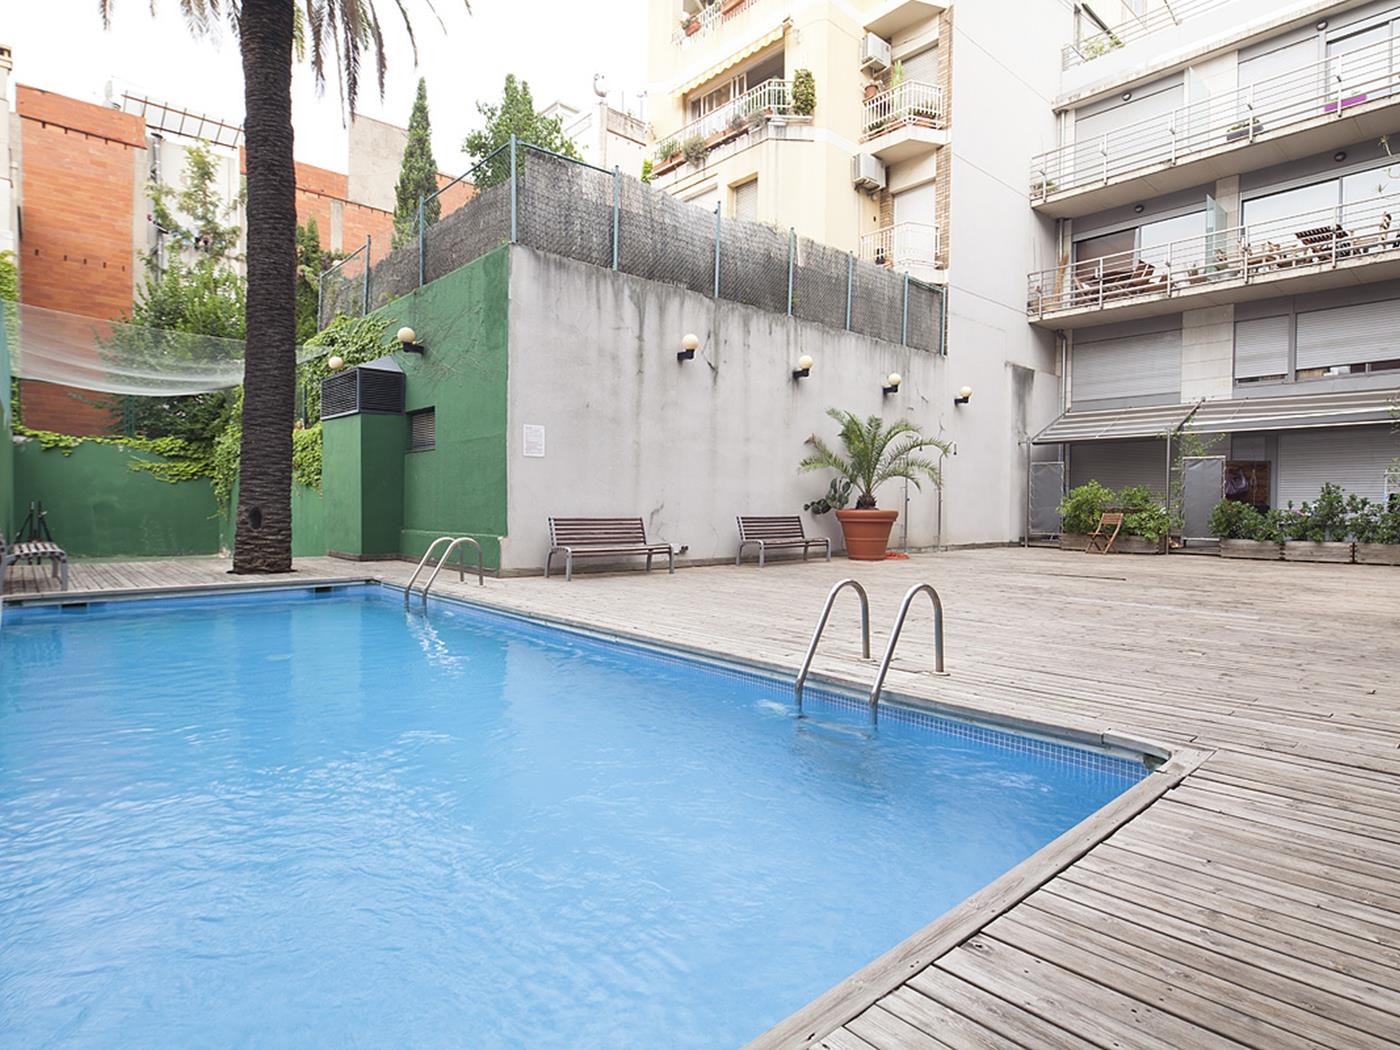 Student apartment rental in Barcelona very close to the centre with terrace - My Space Barcelona Apartments